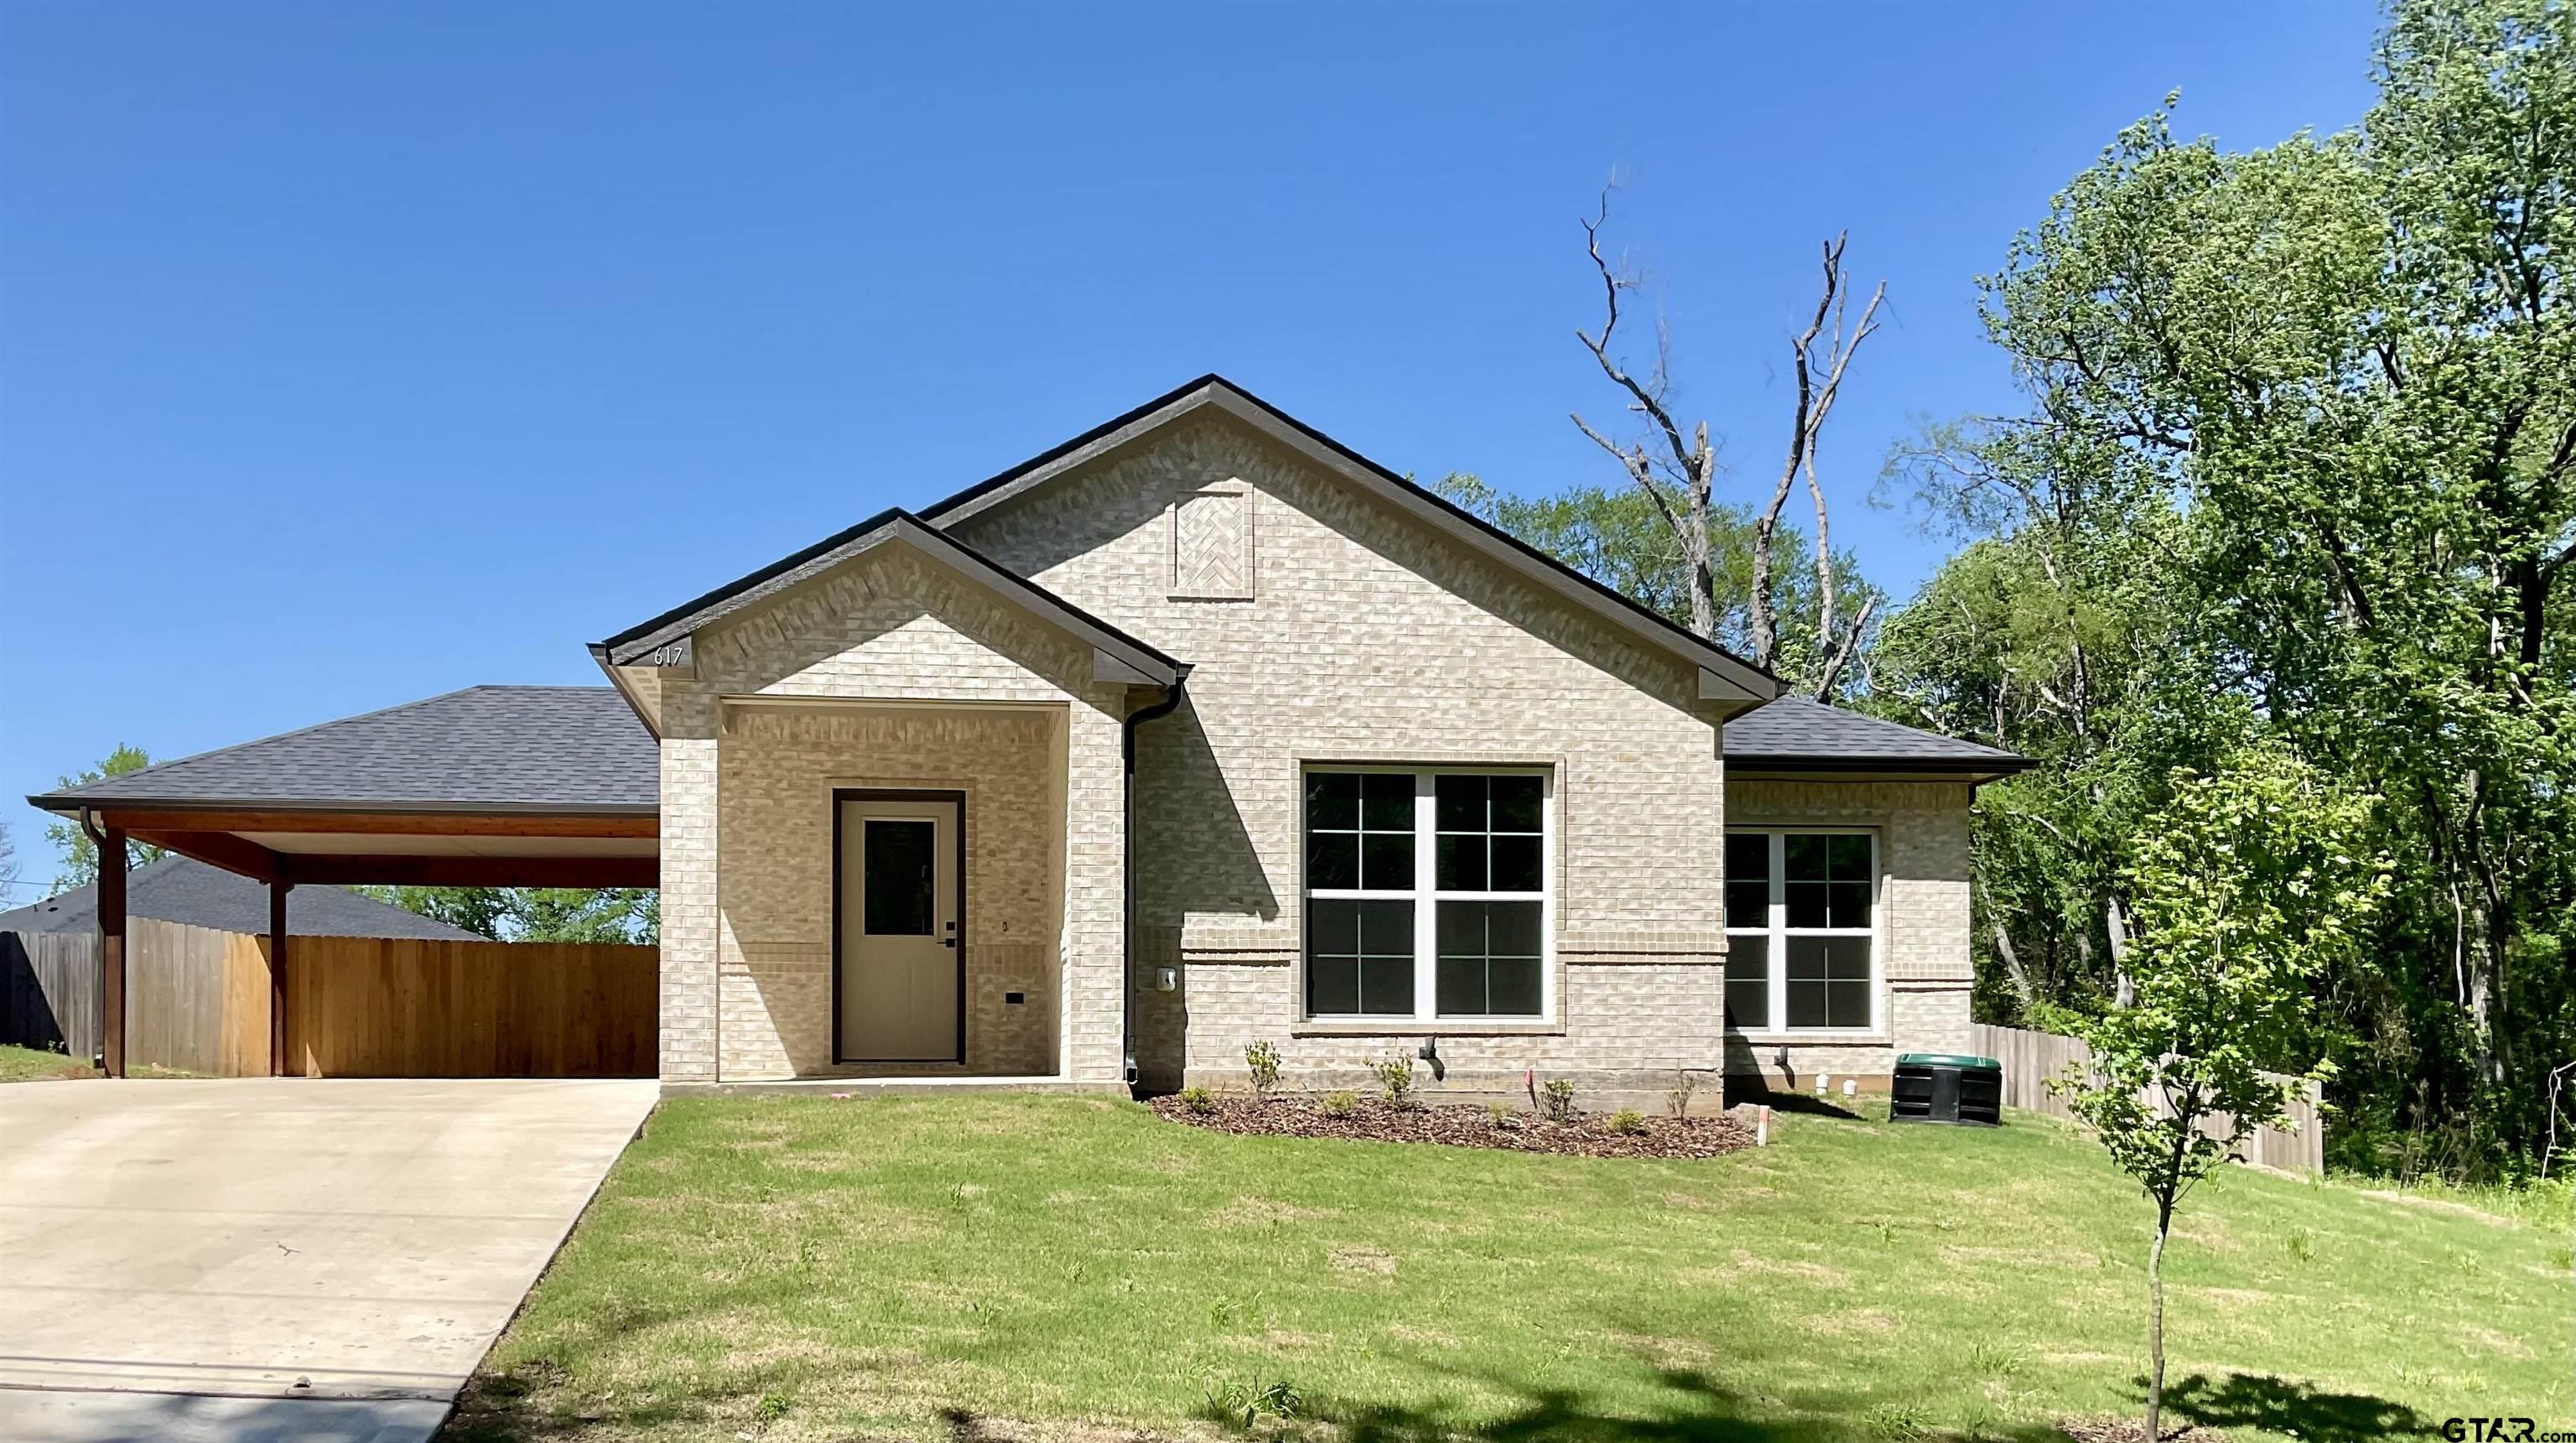 617 E. 8th, Mt Pleasant, Texas 75455, 3 Bedrooms Bedrooms, ,2 BathroomsBathrooms,Single Family Detached,For Sale,E. 8th,24005324